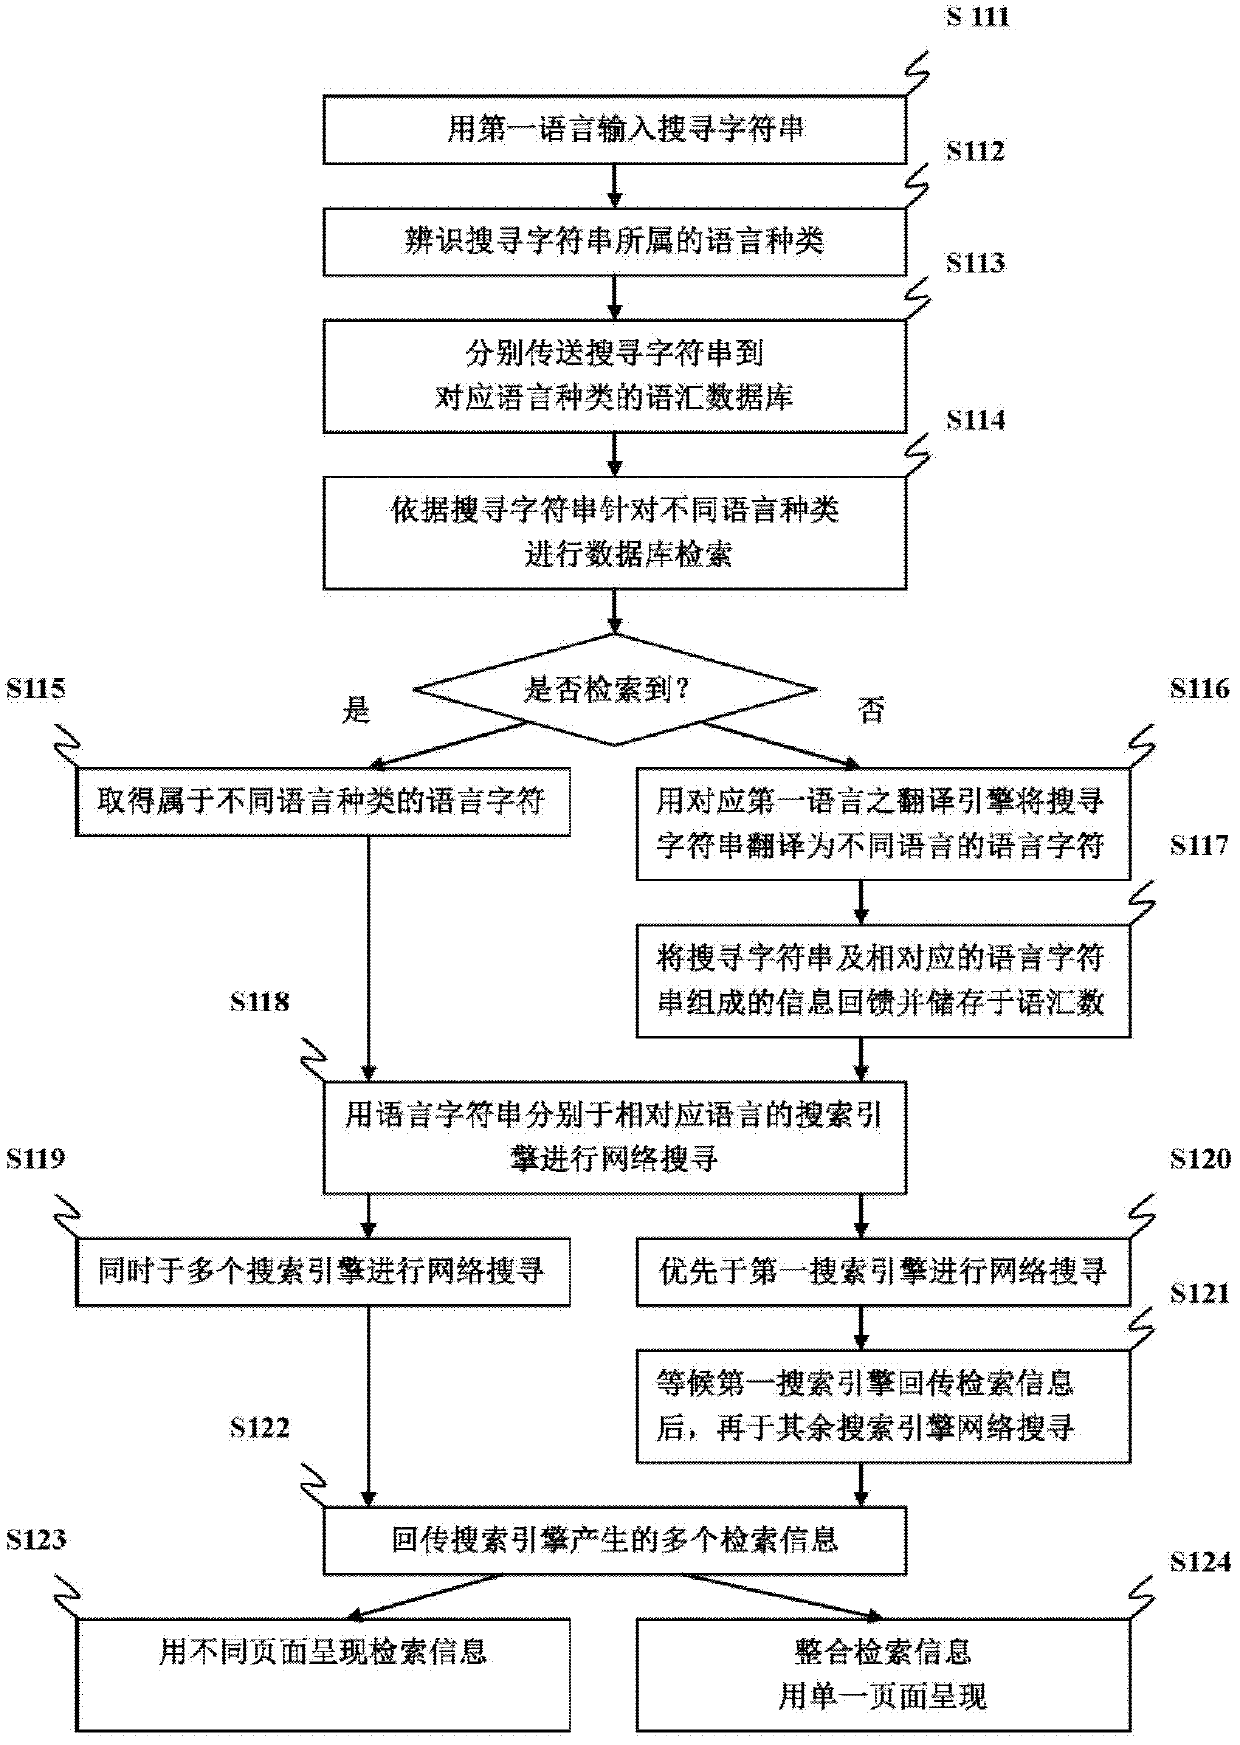 Multi-language retrieving method, computer readable storage medium and network searching system